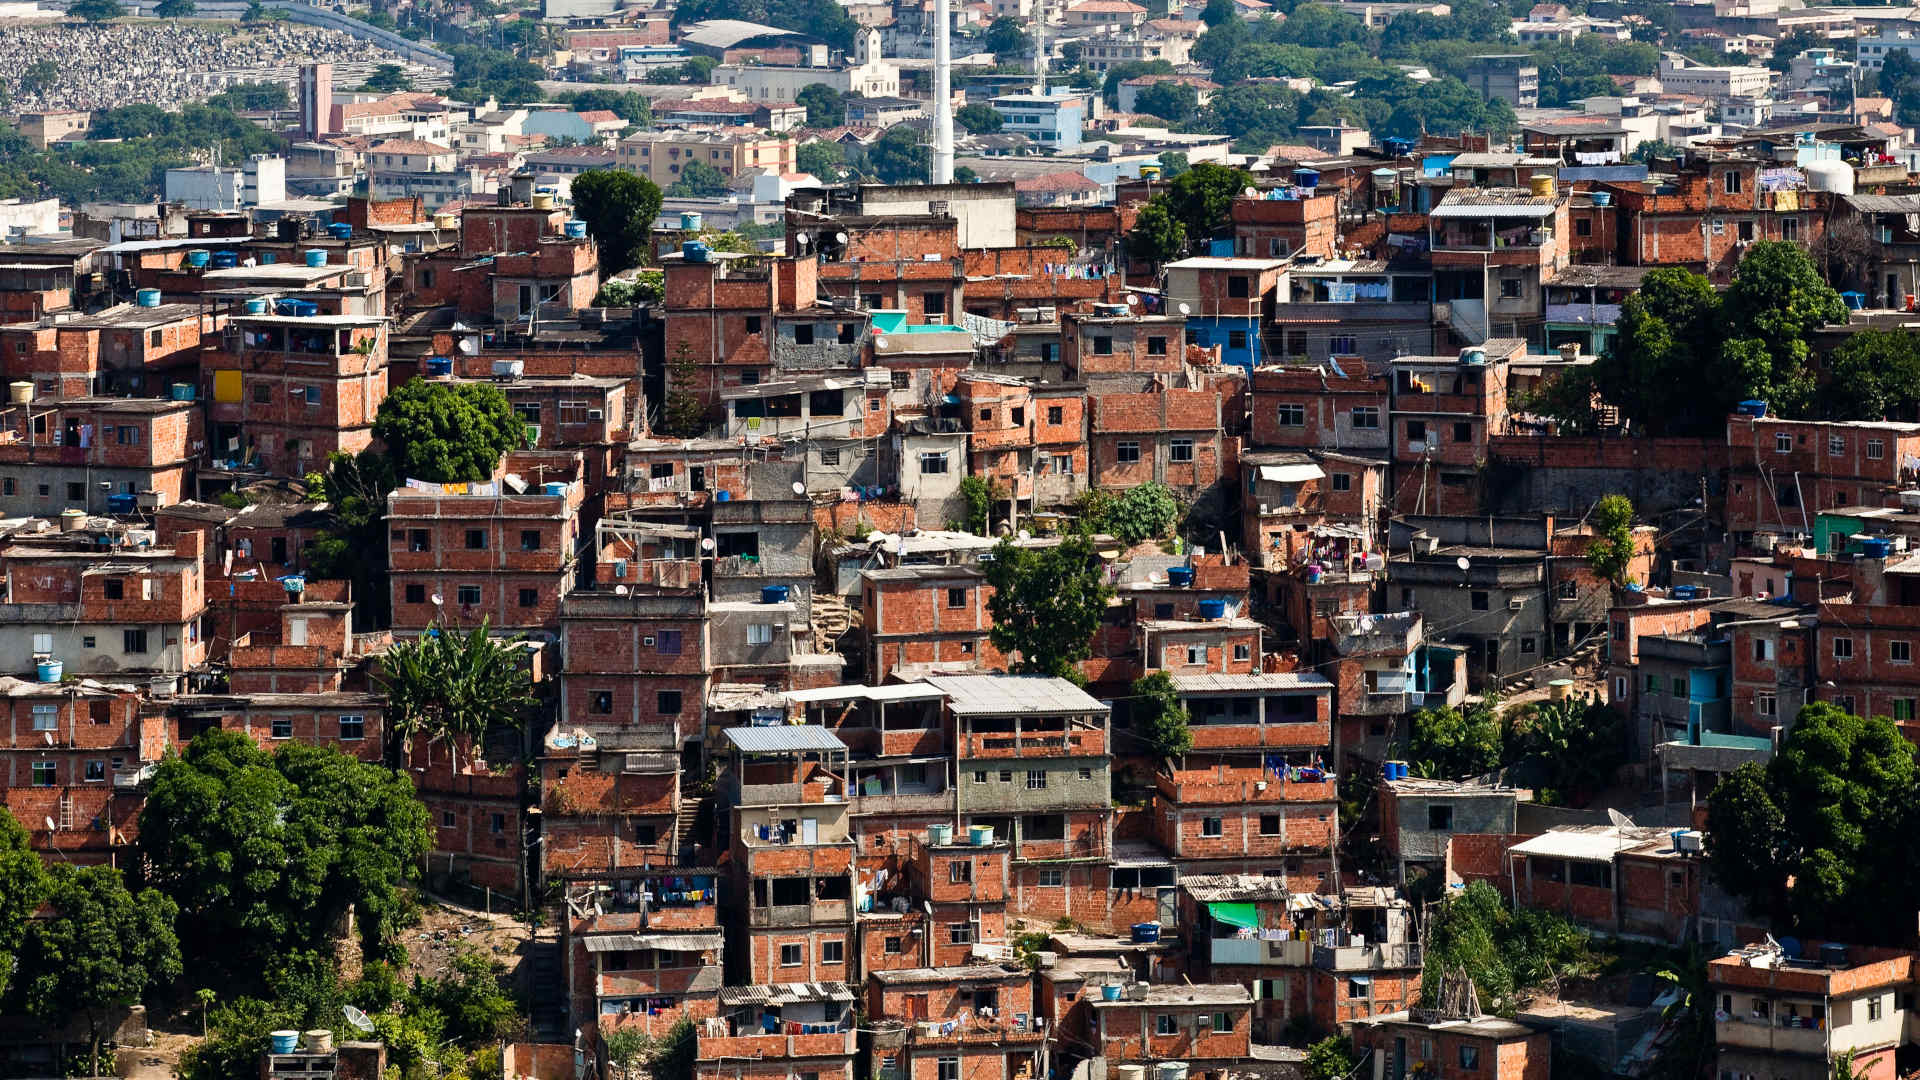 Favela do Alemao in Rio de Janeiro, 2011. Low-income urban communities like these tend to lack greenery and are more likely to face extreme heat than their wealthier or more rural counterparts.